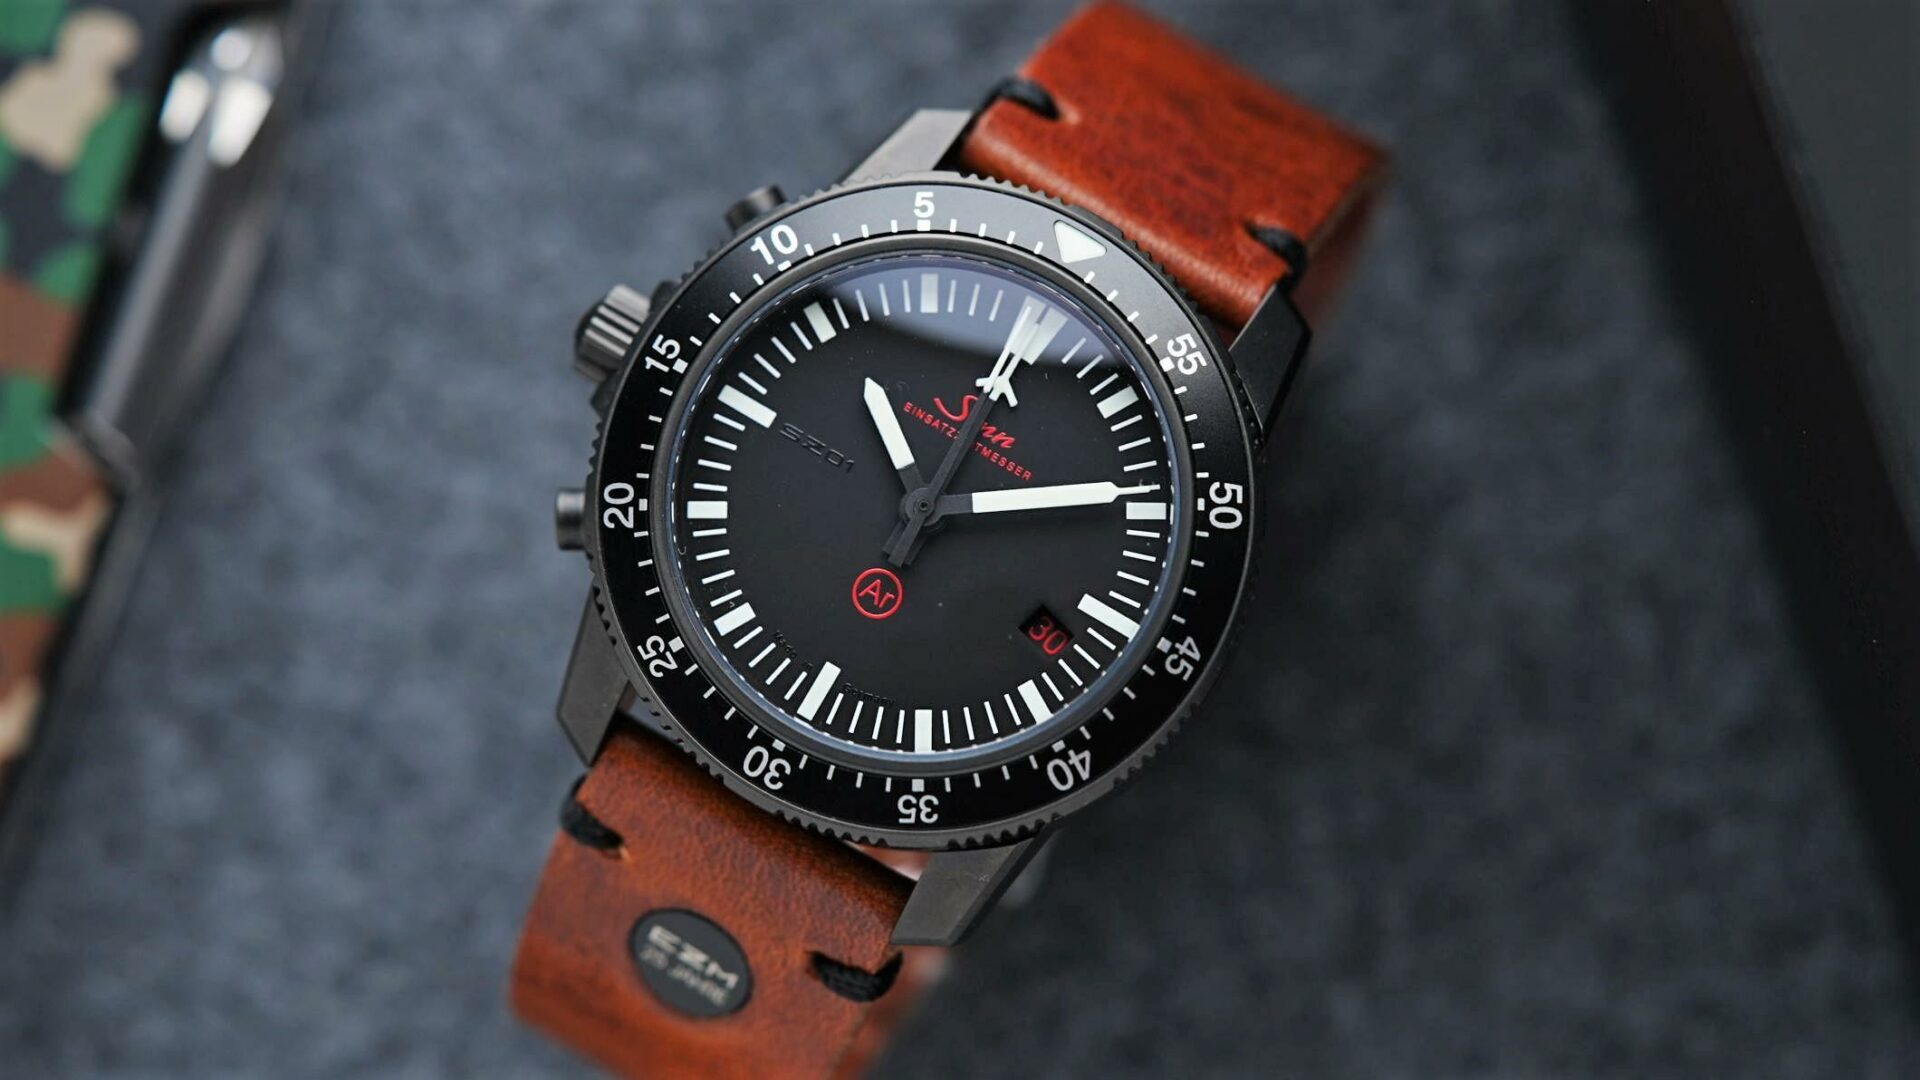 Sinn EZM 1.1S Limited Edition 500 with army knife in background.